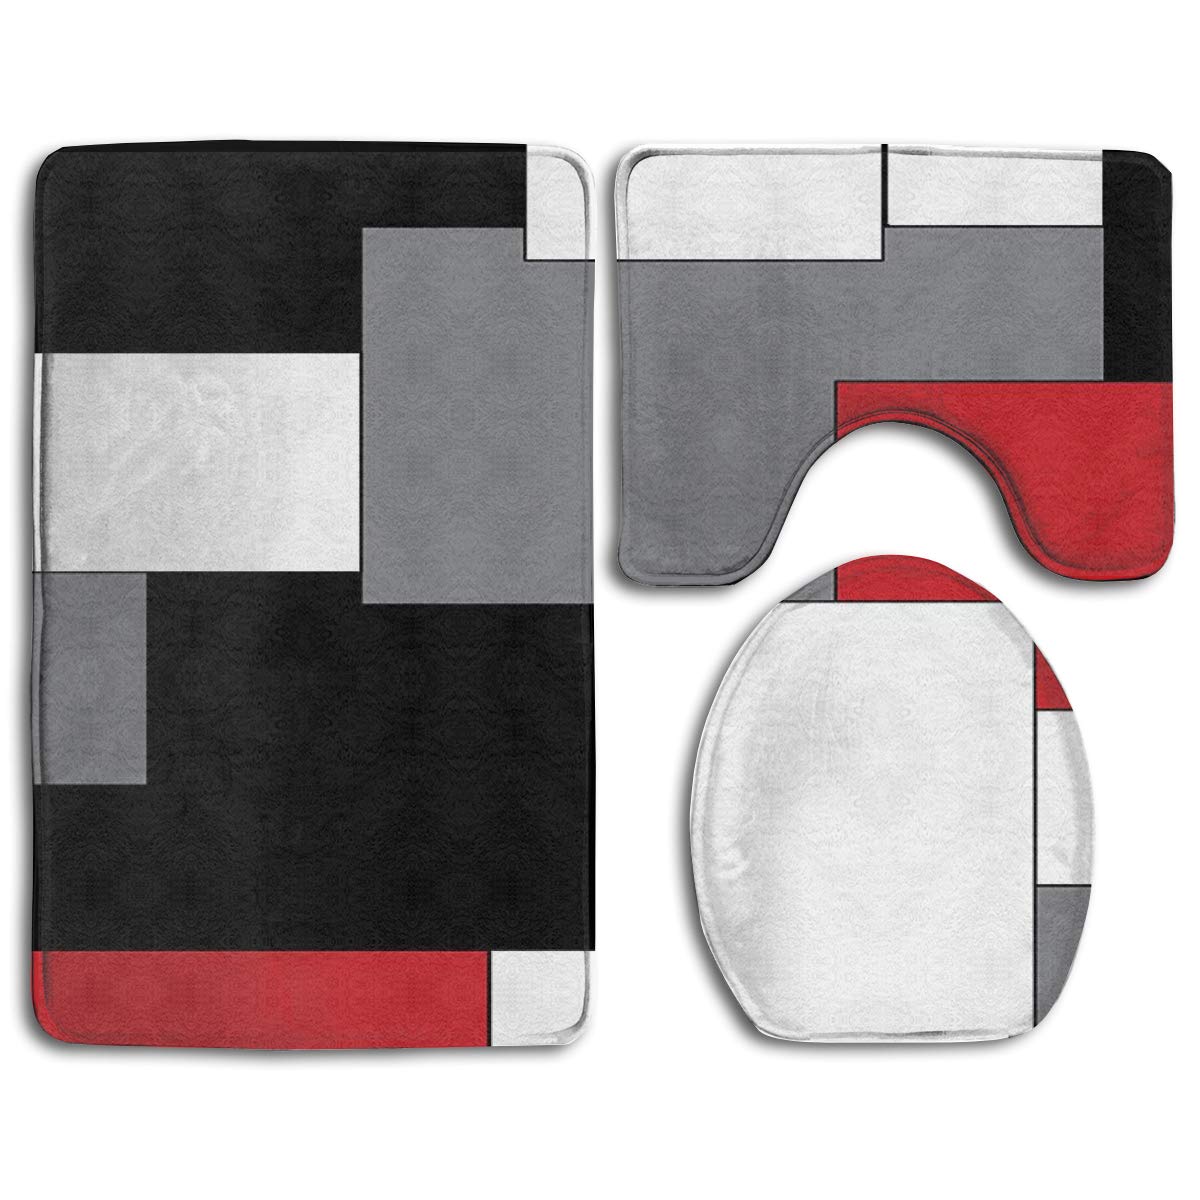 PUDMAD White Grey Black and Red Irregular Geometric 3 Piece Bathroom Rugs Set Bath Rug Contour Mat and Toilet Lid Cover - image 1 of 2